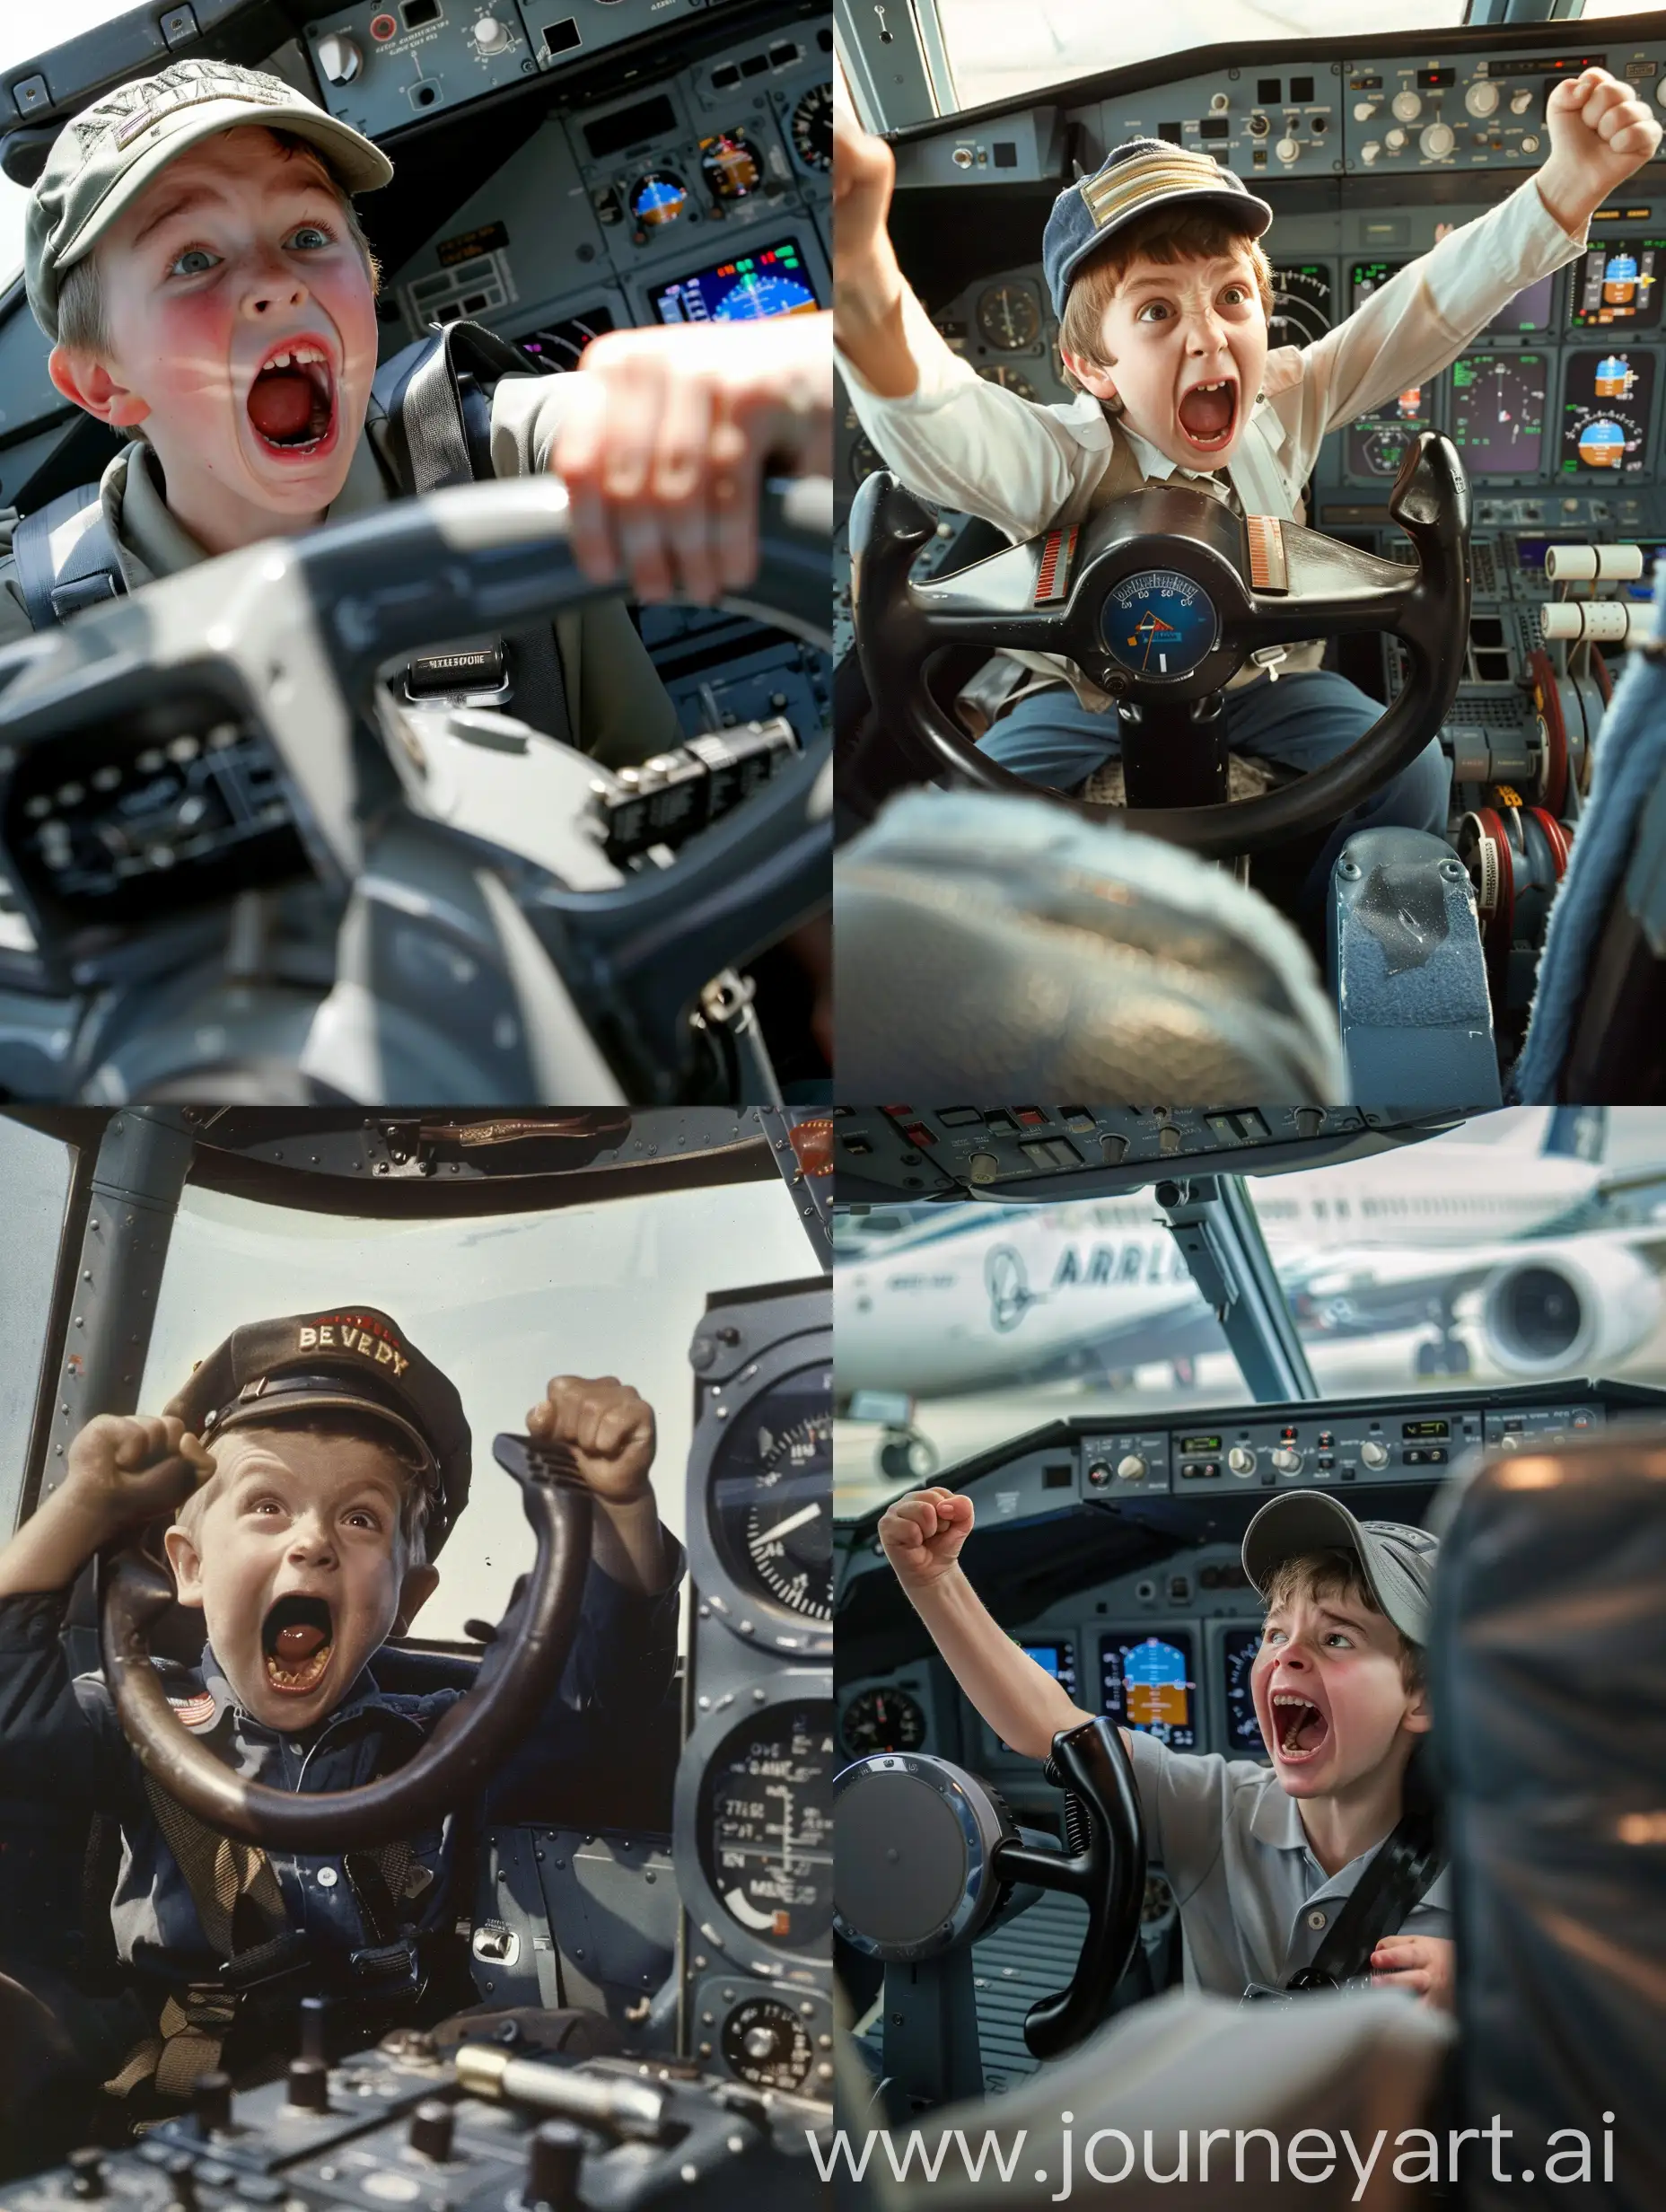 A boy in a pilot's cap screams mouth open wide while sitting in the cockpit of a Boeing plane and holds onto the steering wheel of an airplane
